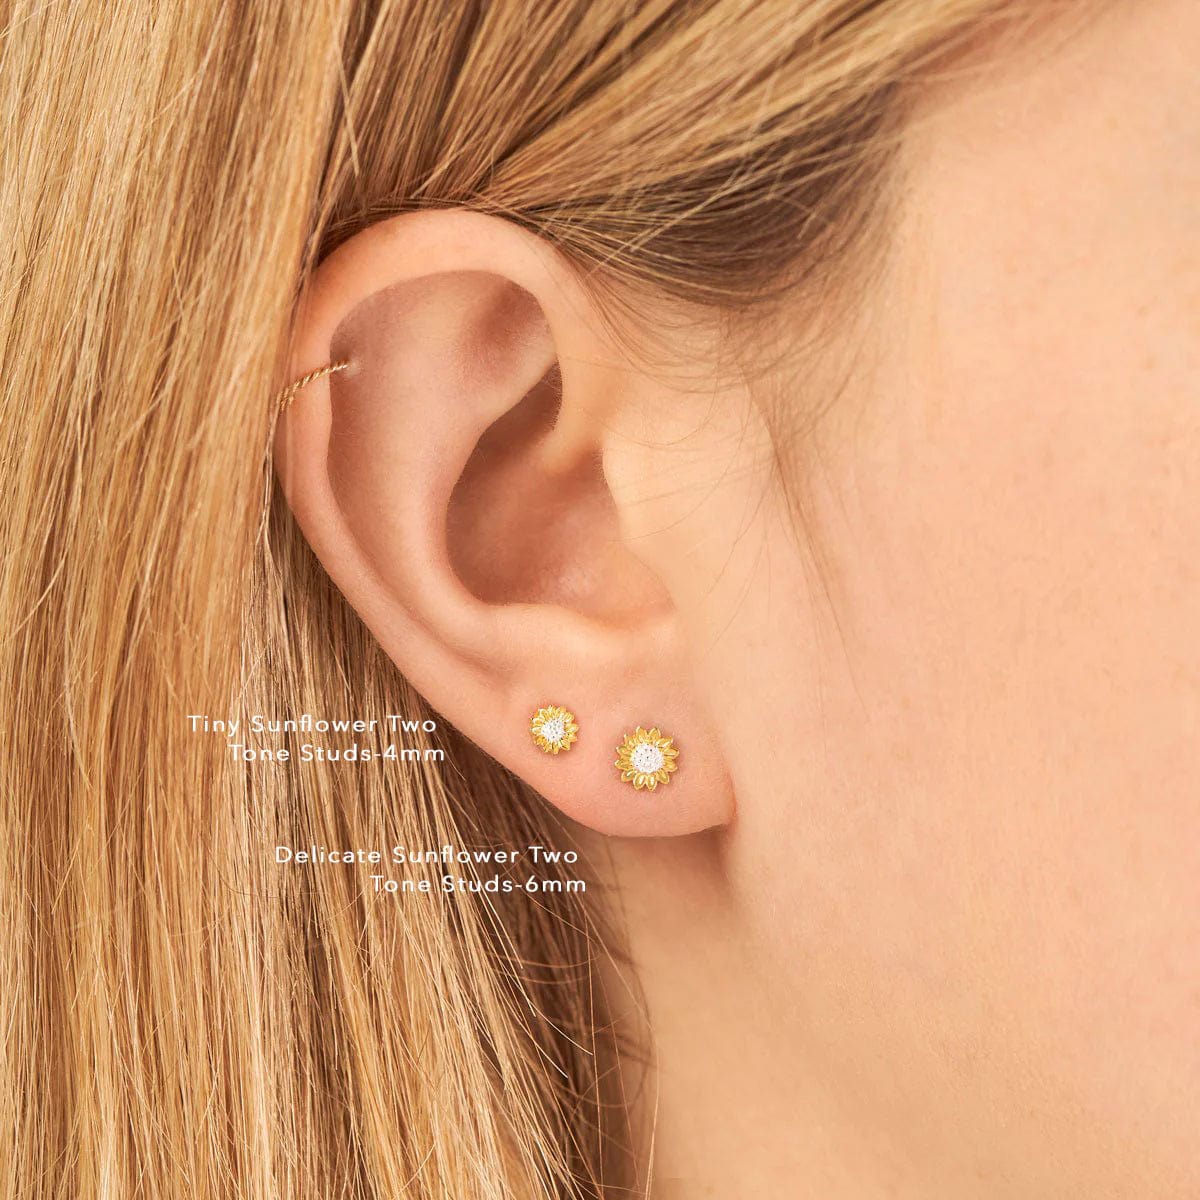 Delicate Sunflower Two Tone Studs